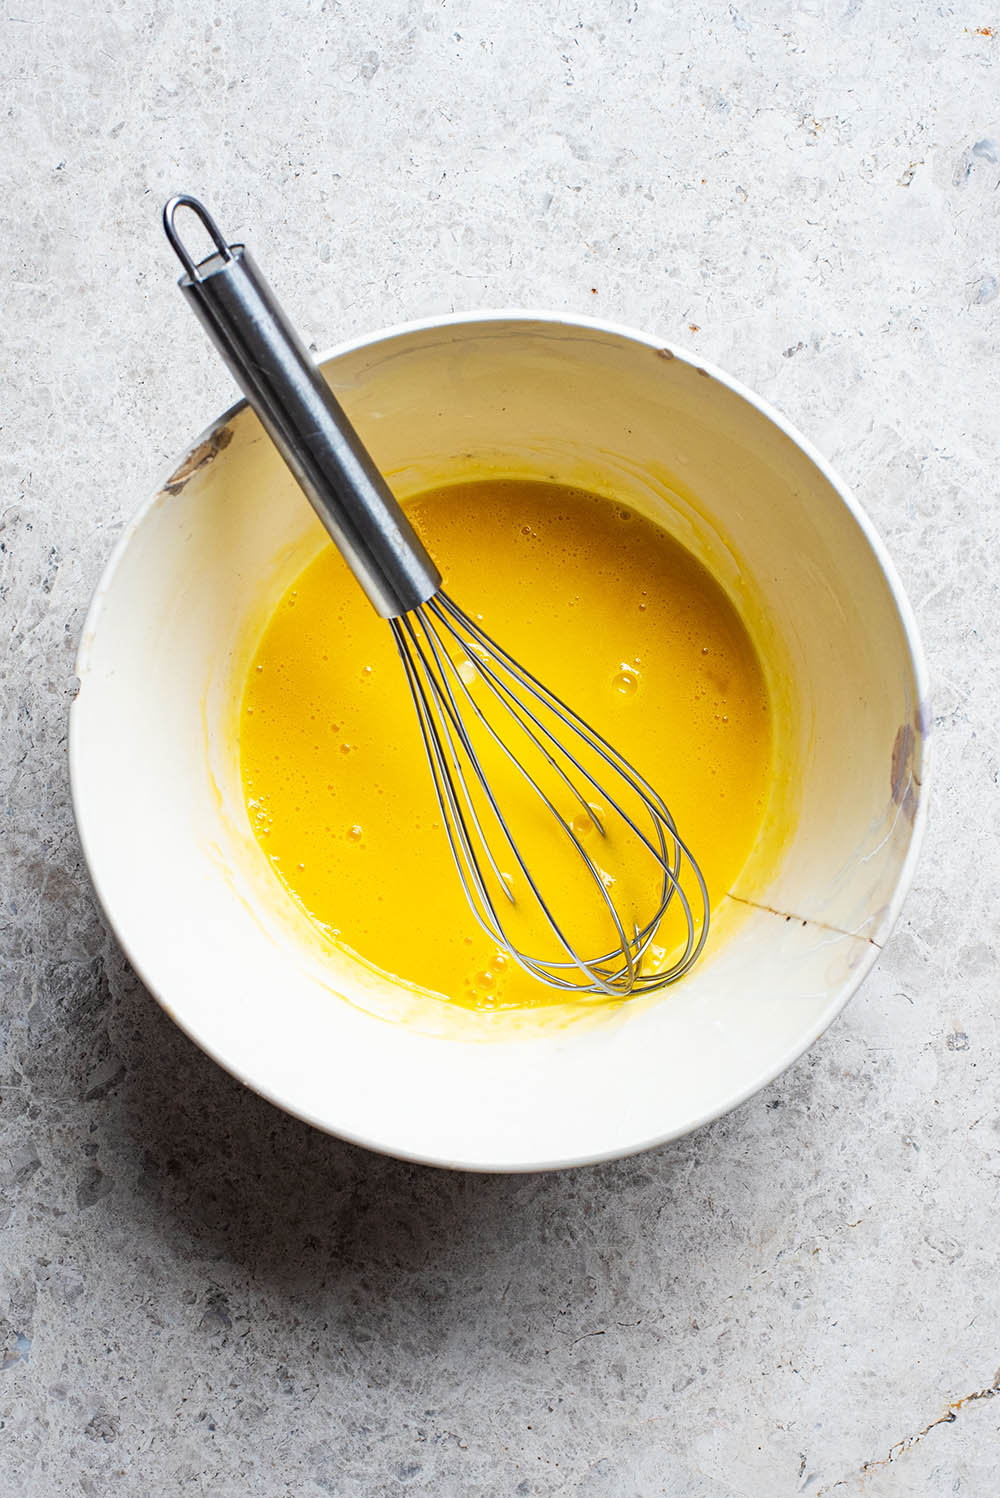 Whisked egg yolks in a bowl.